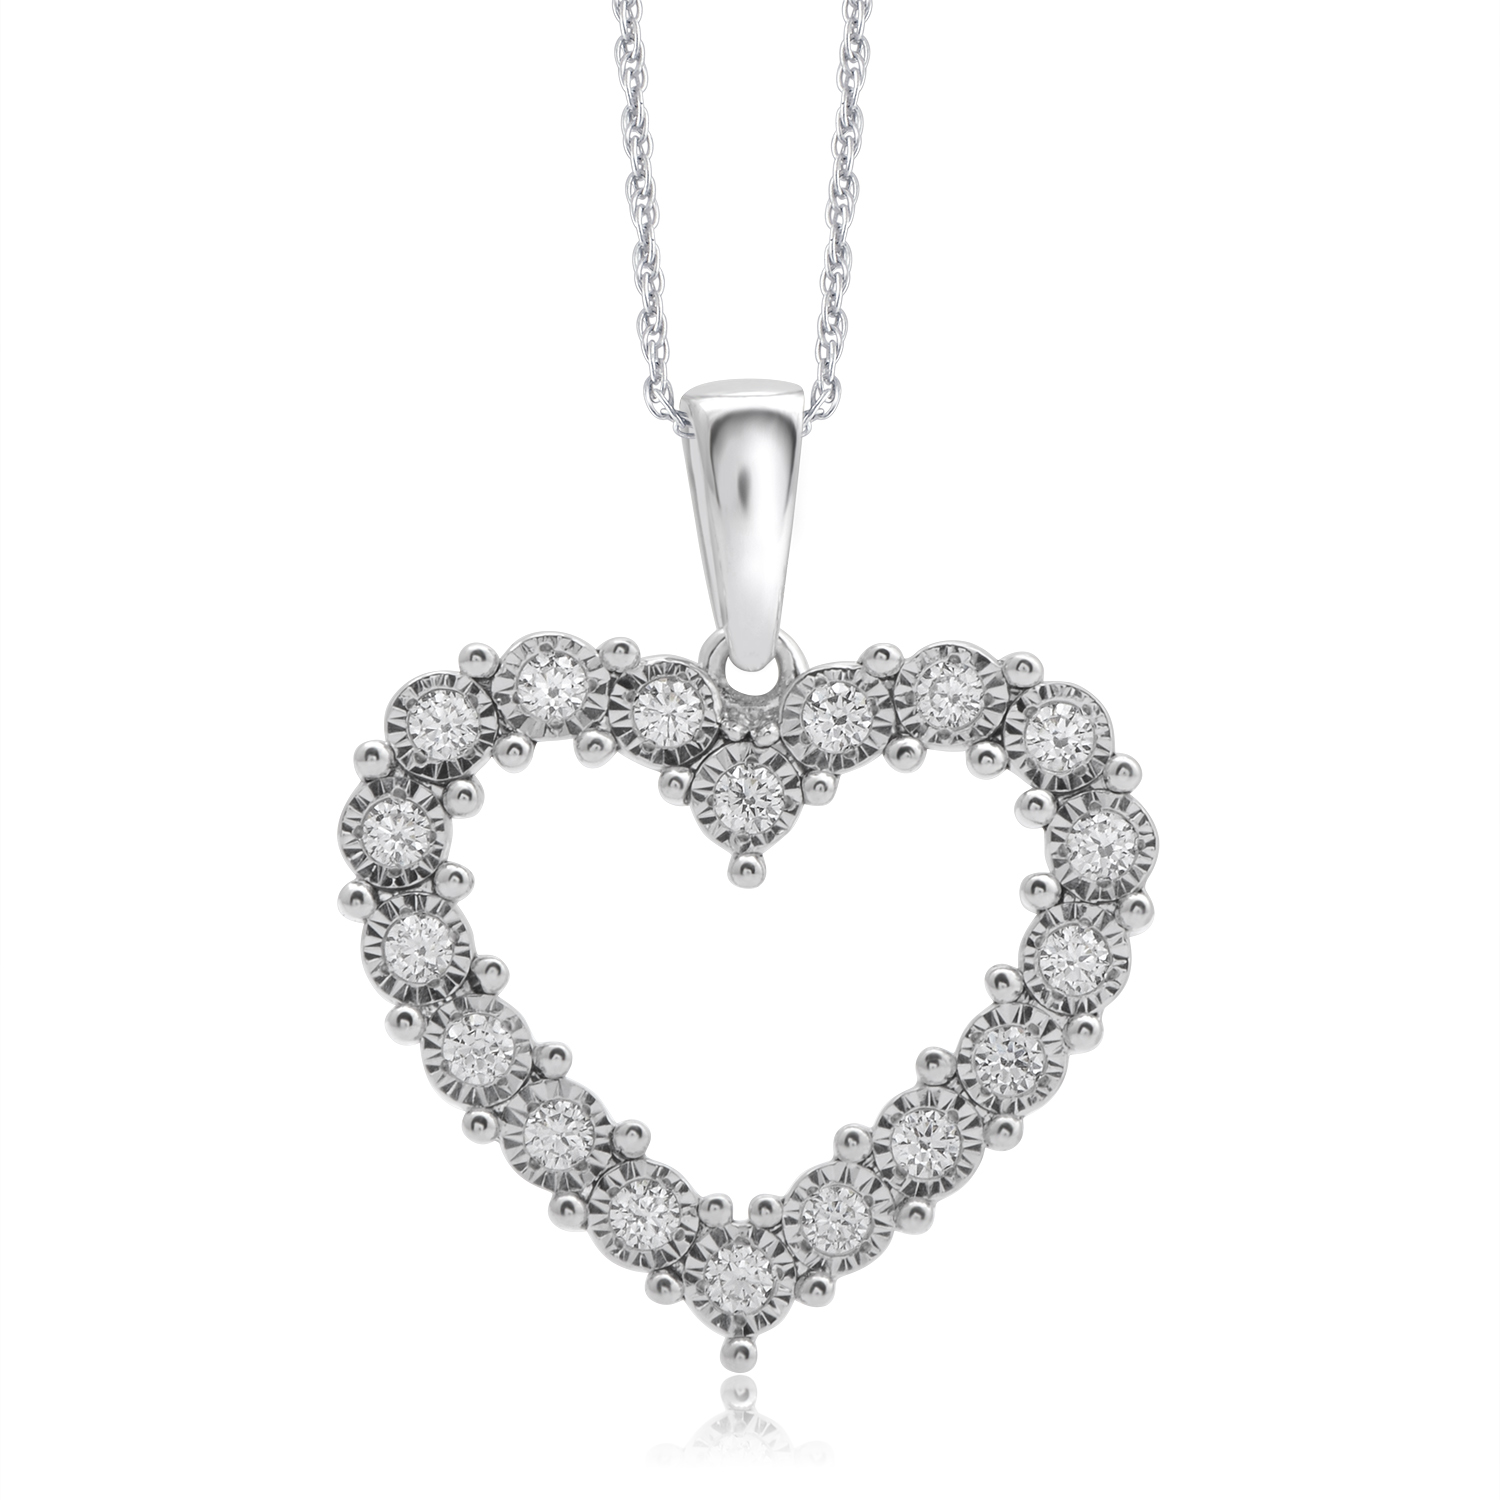 0.25 Carat Heart Shaped Diamond Pendant Necklace in 10k White Gold